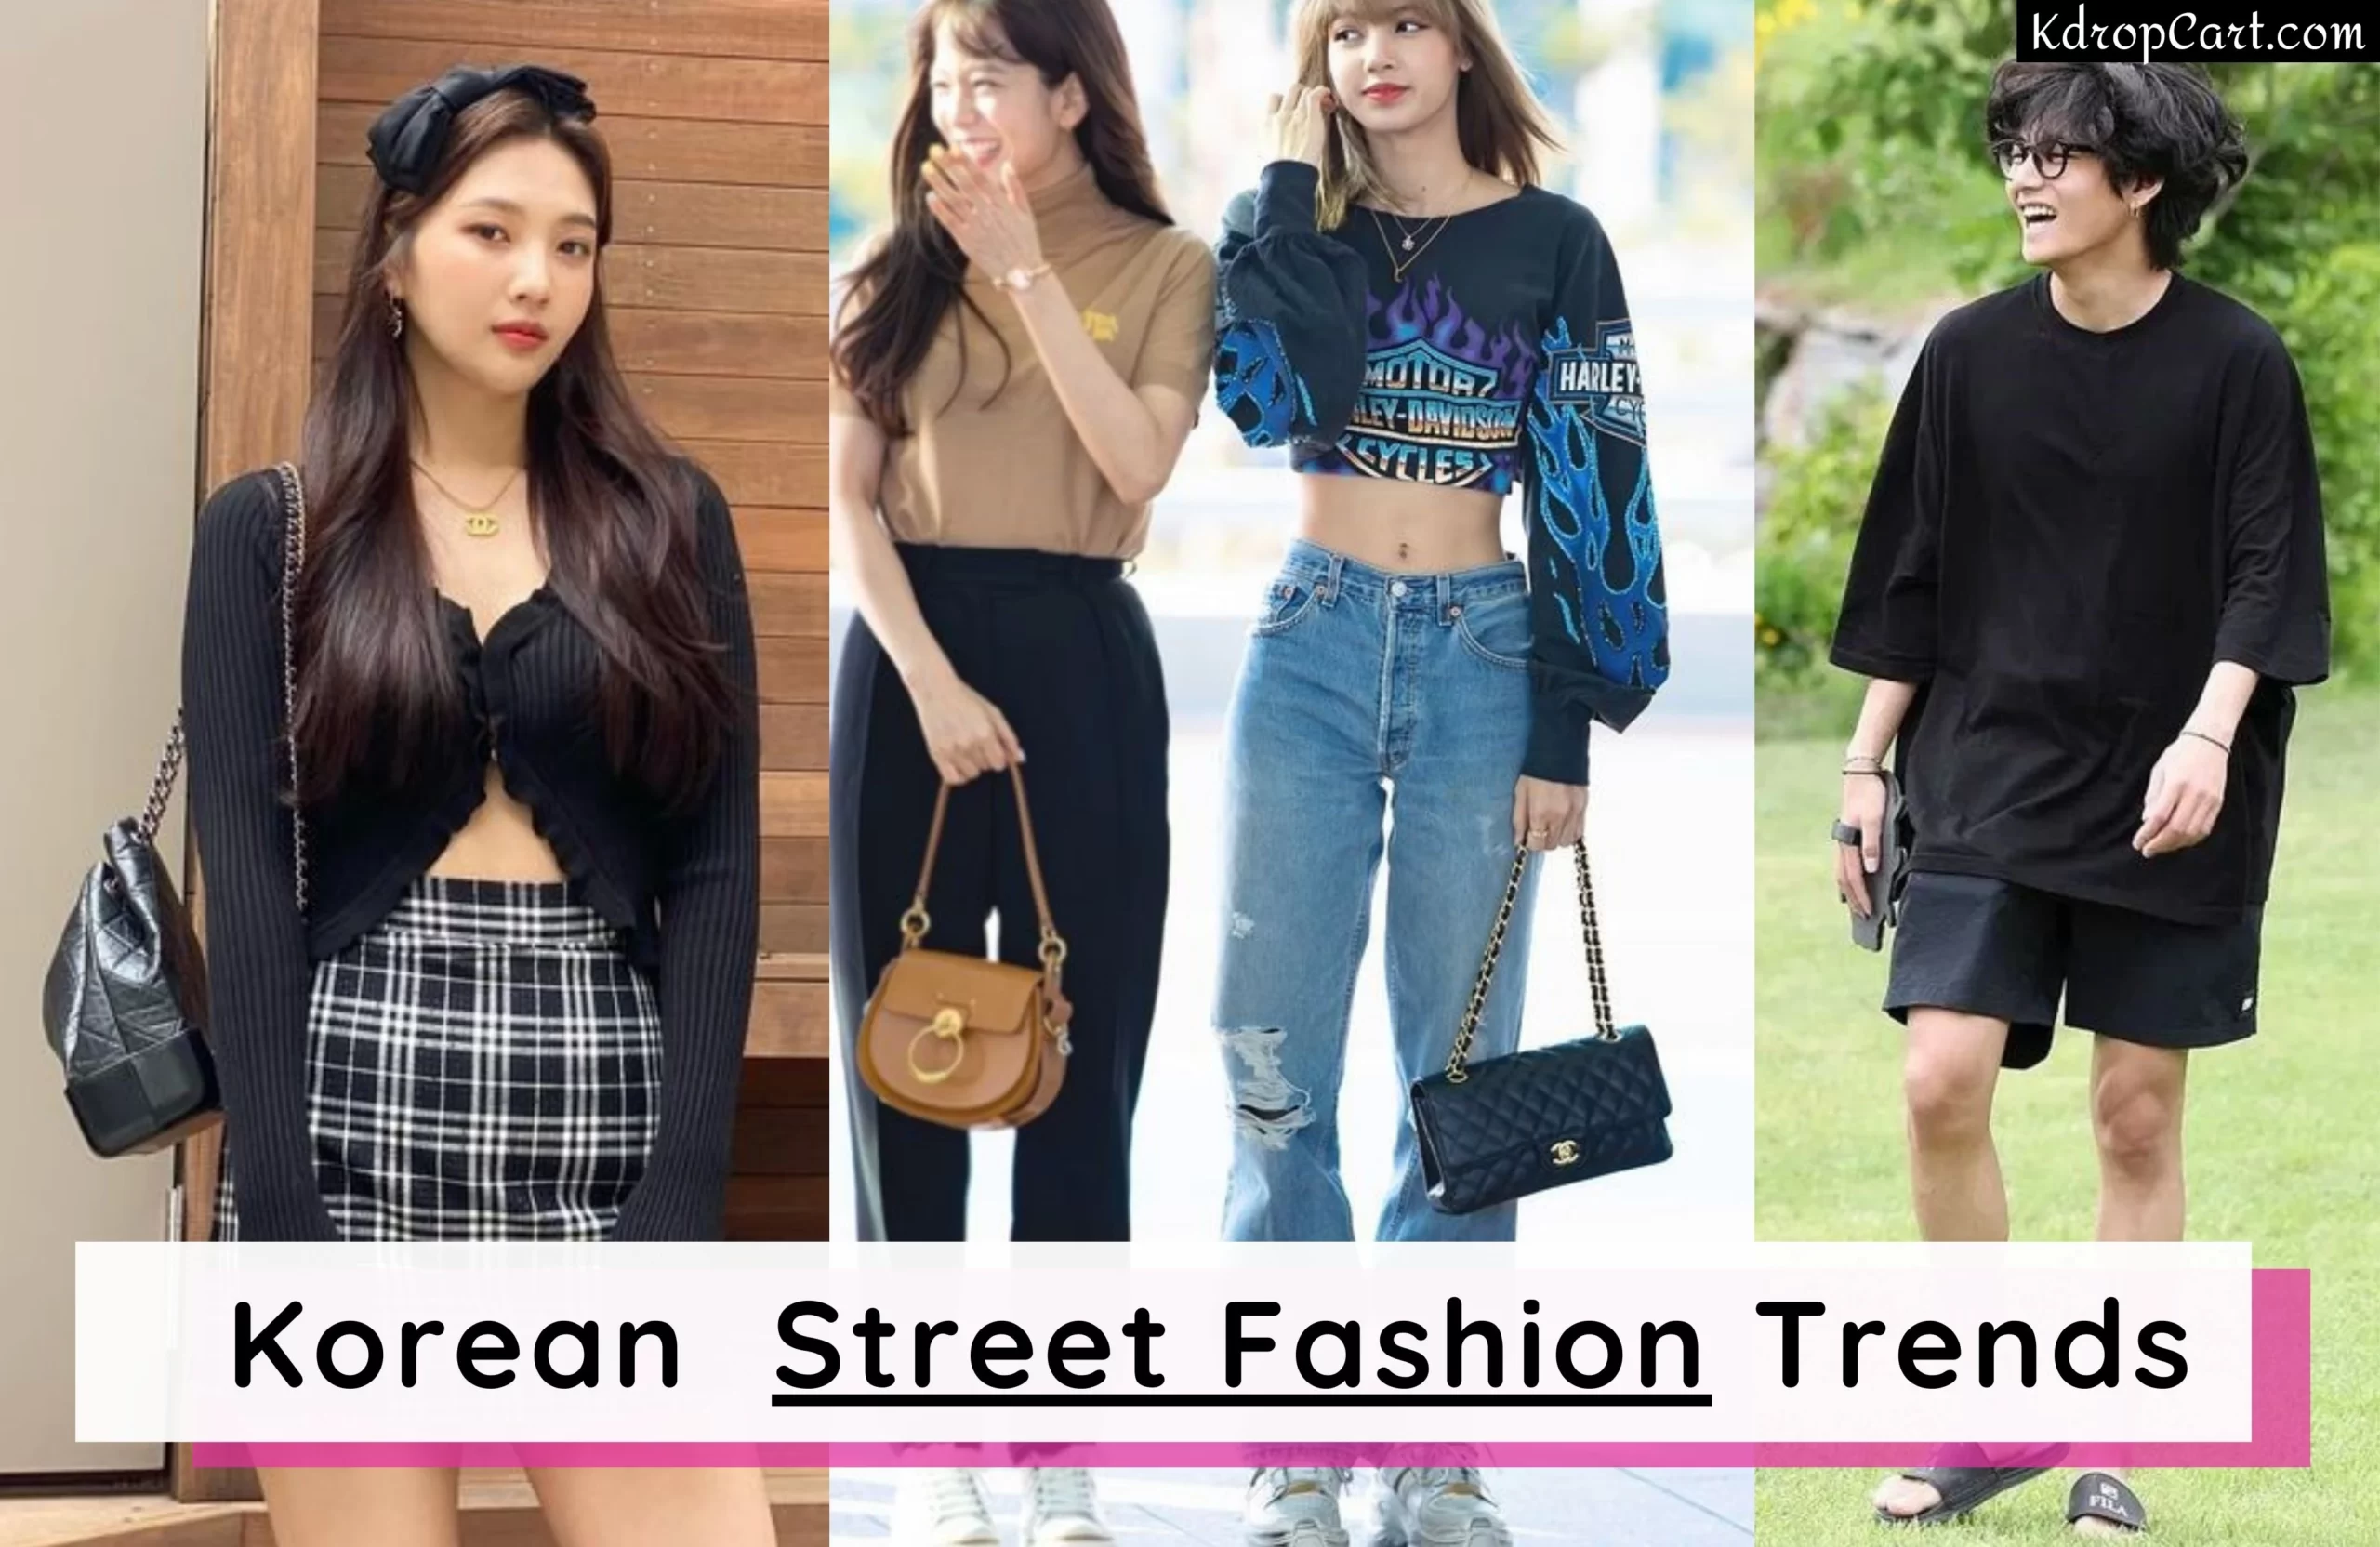 7 New Korean Street Fashion Trends in 2023? Where to shop for Korean